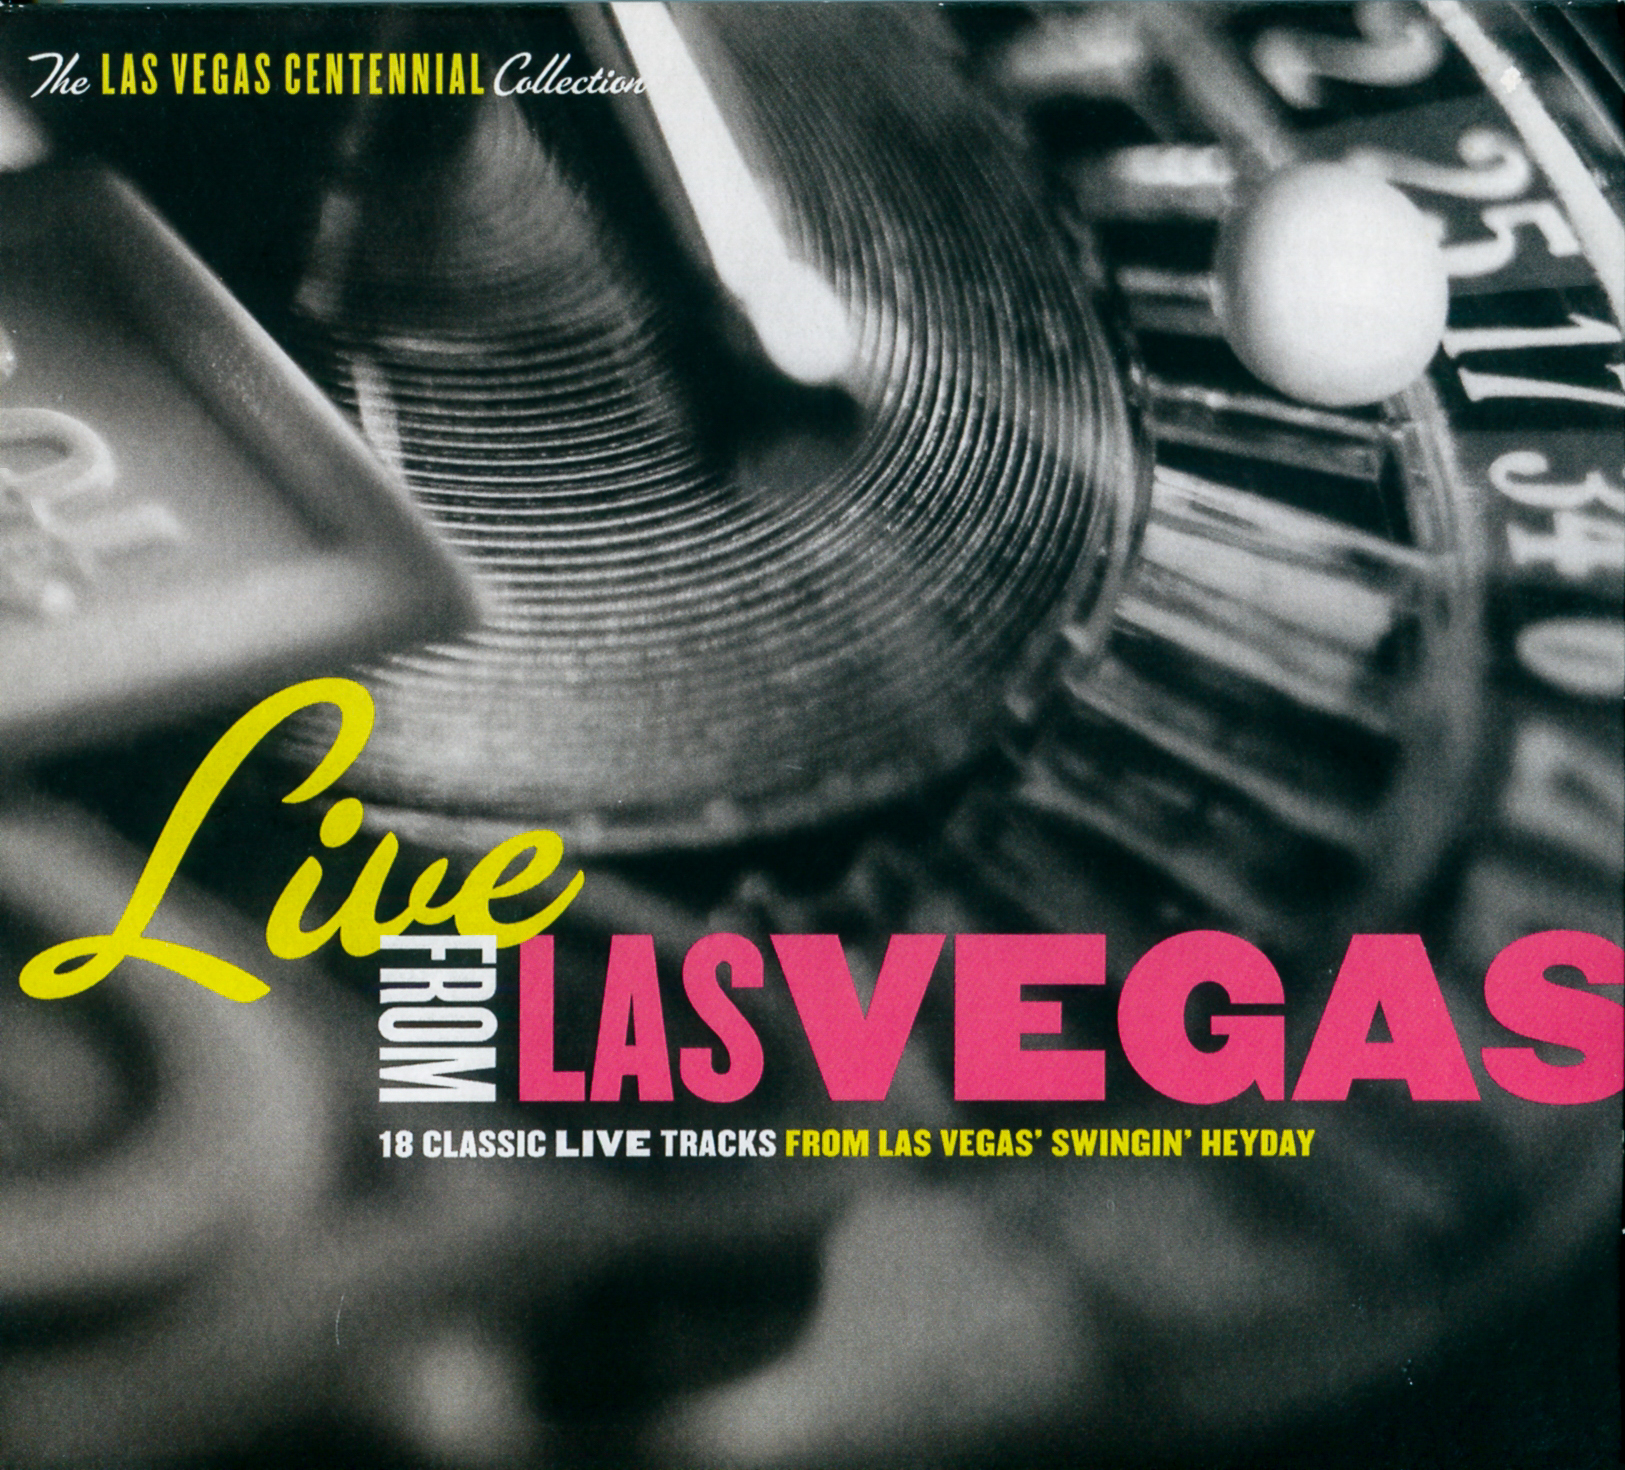 Release “Live from Las Vegas: 18 Classic Live Tracks from Las